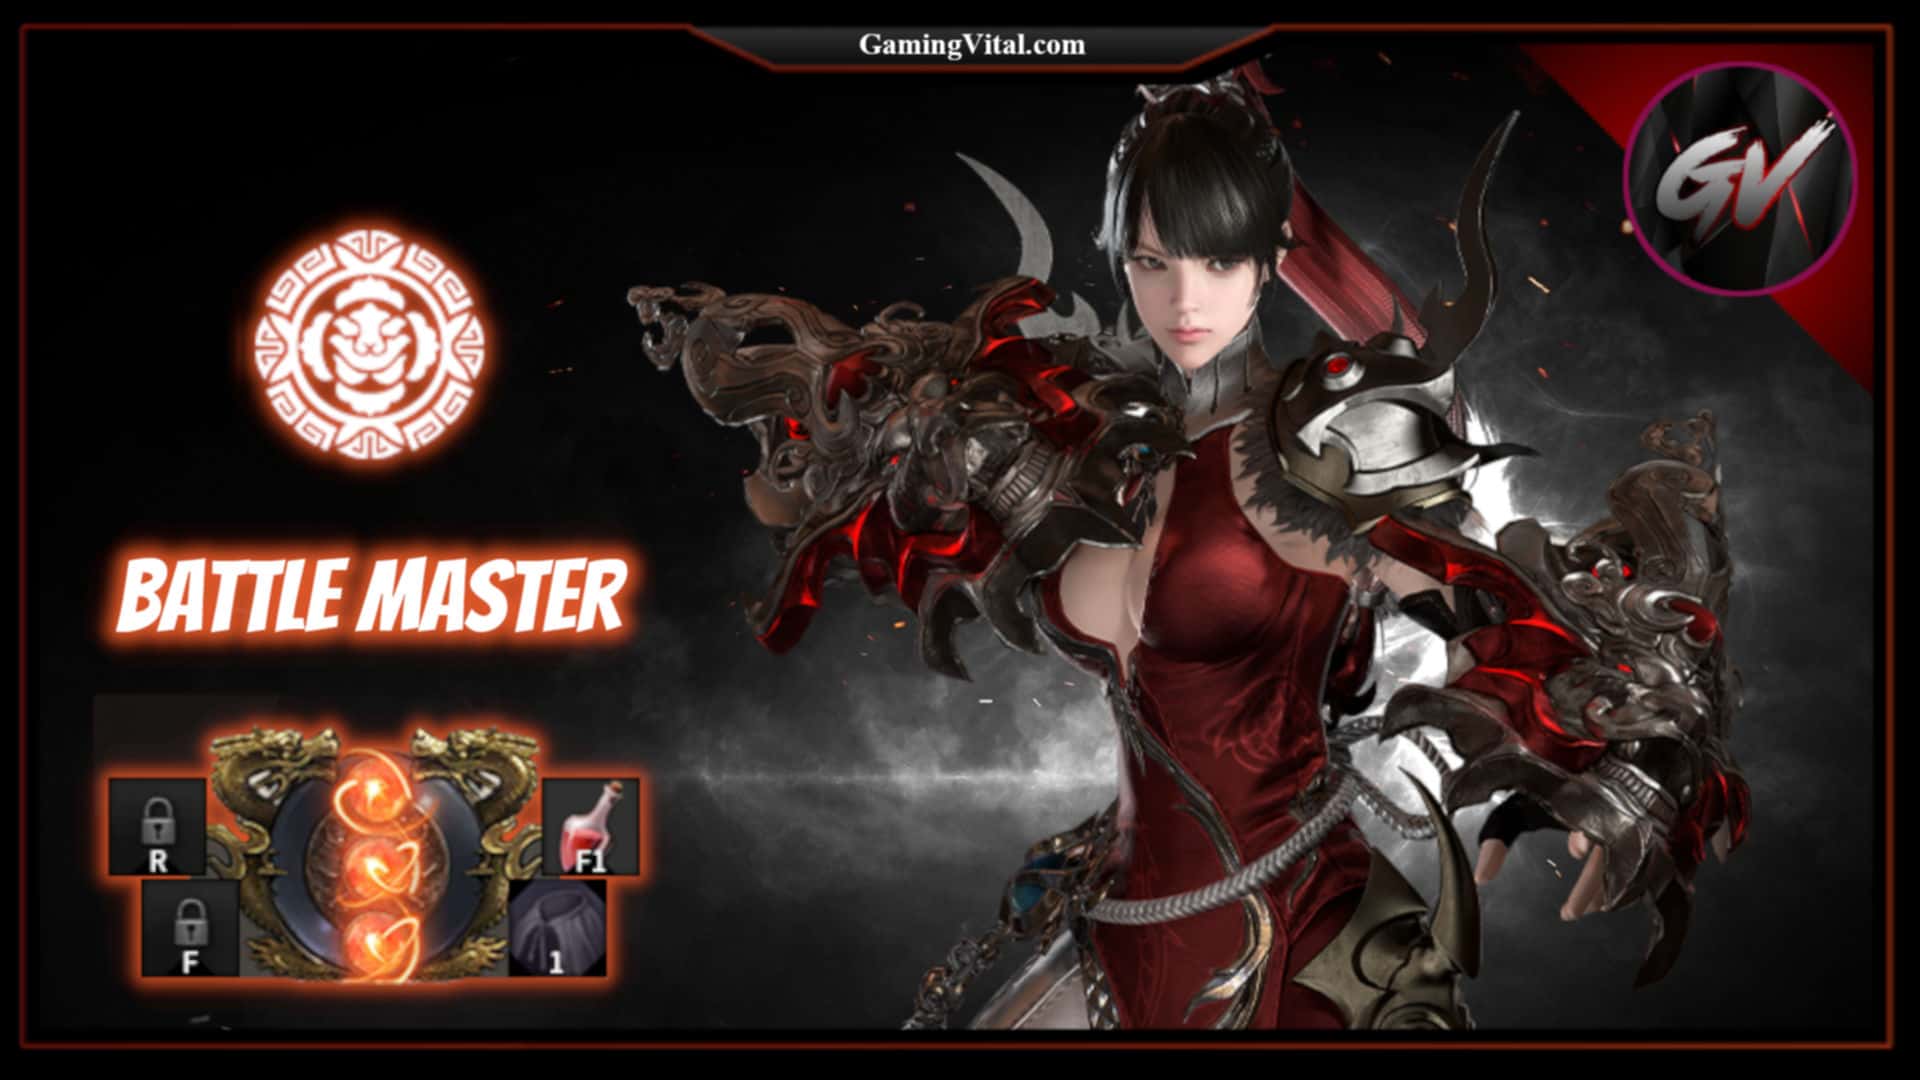 Lost Ark Battle Master Wardancer Guide Builds Pve Pvp Esoteric Gameplay Dps Skills Stats Gaming Vital